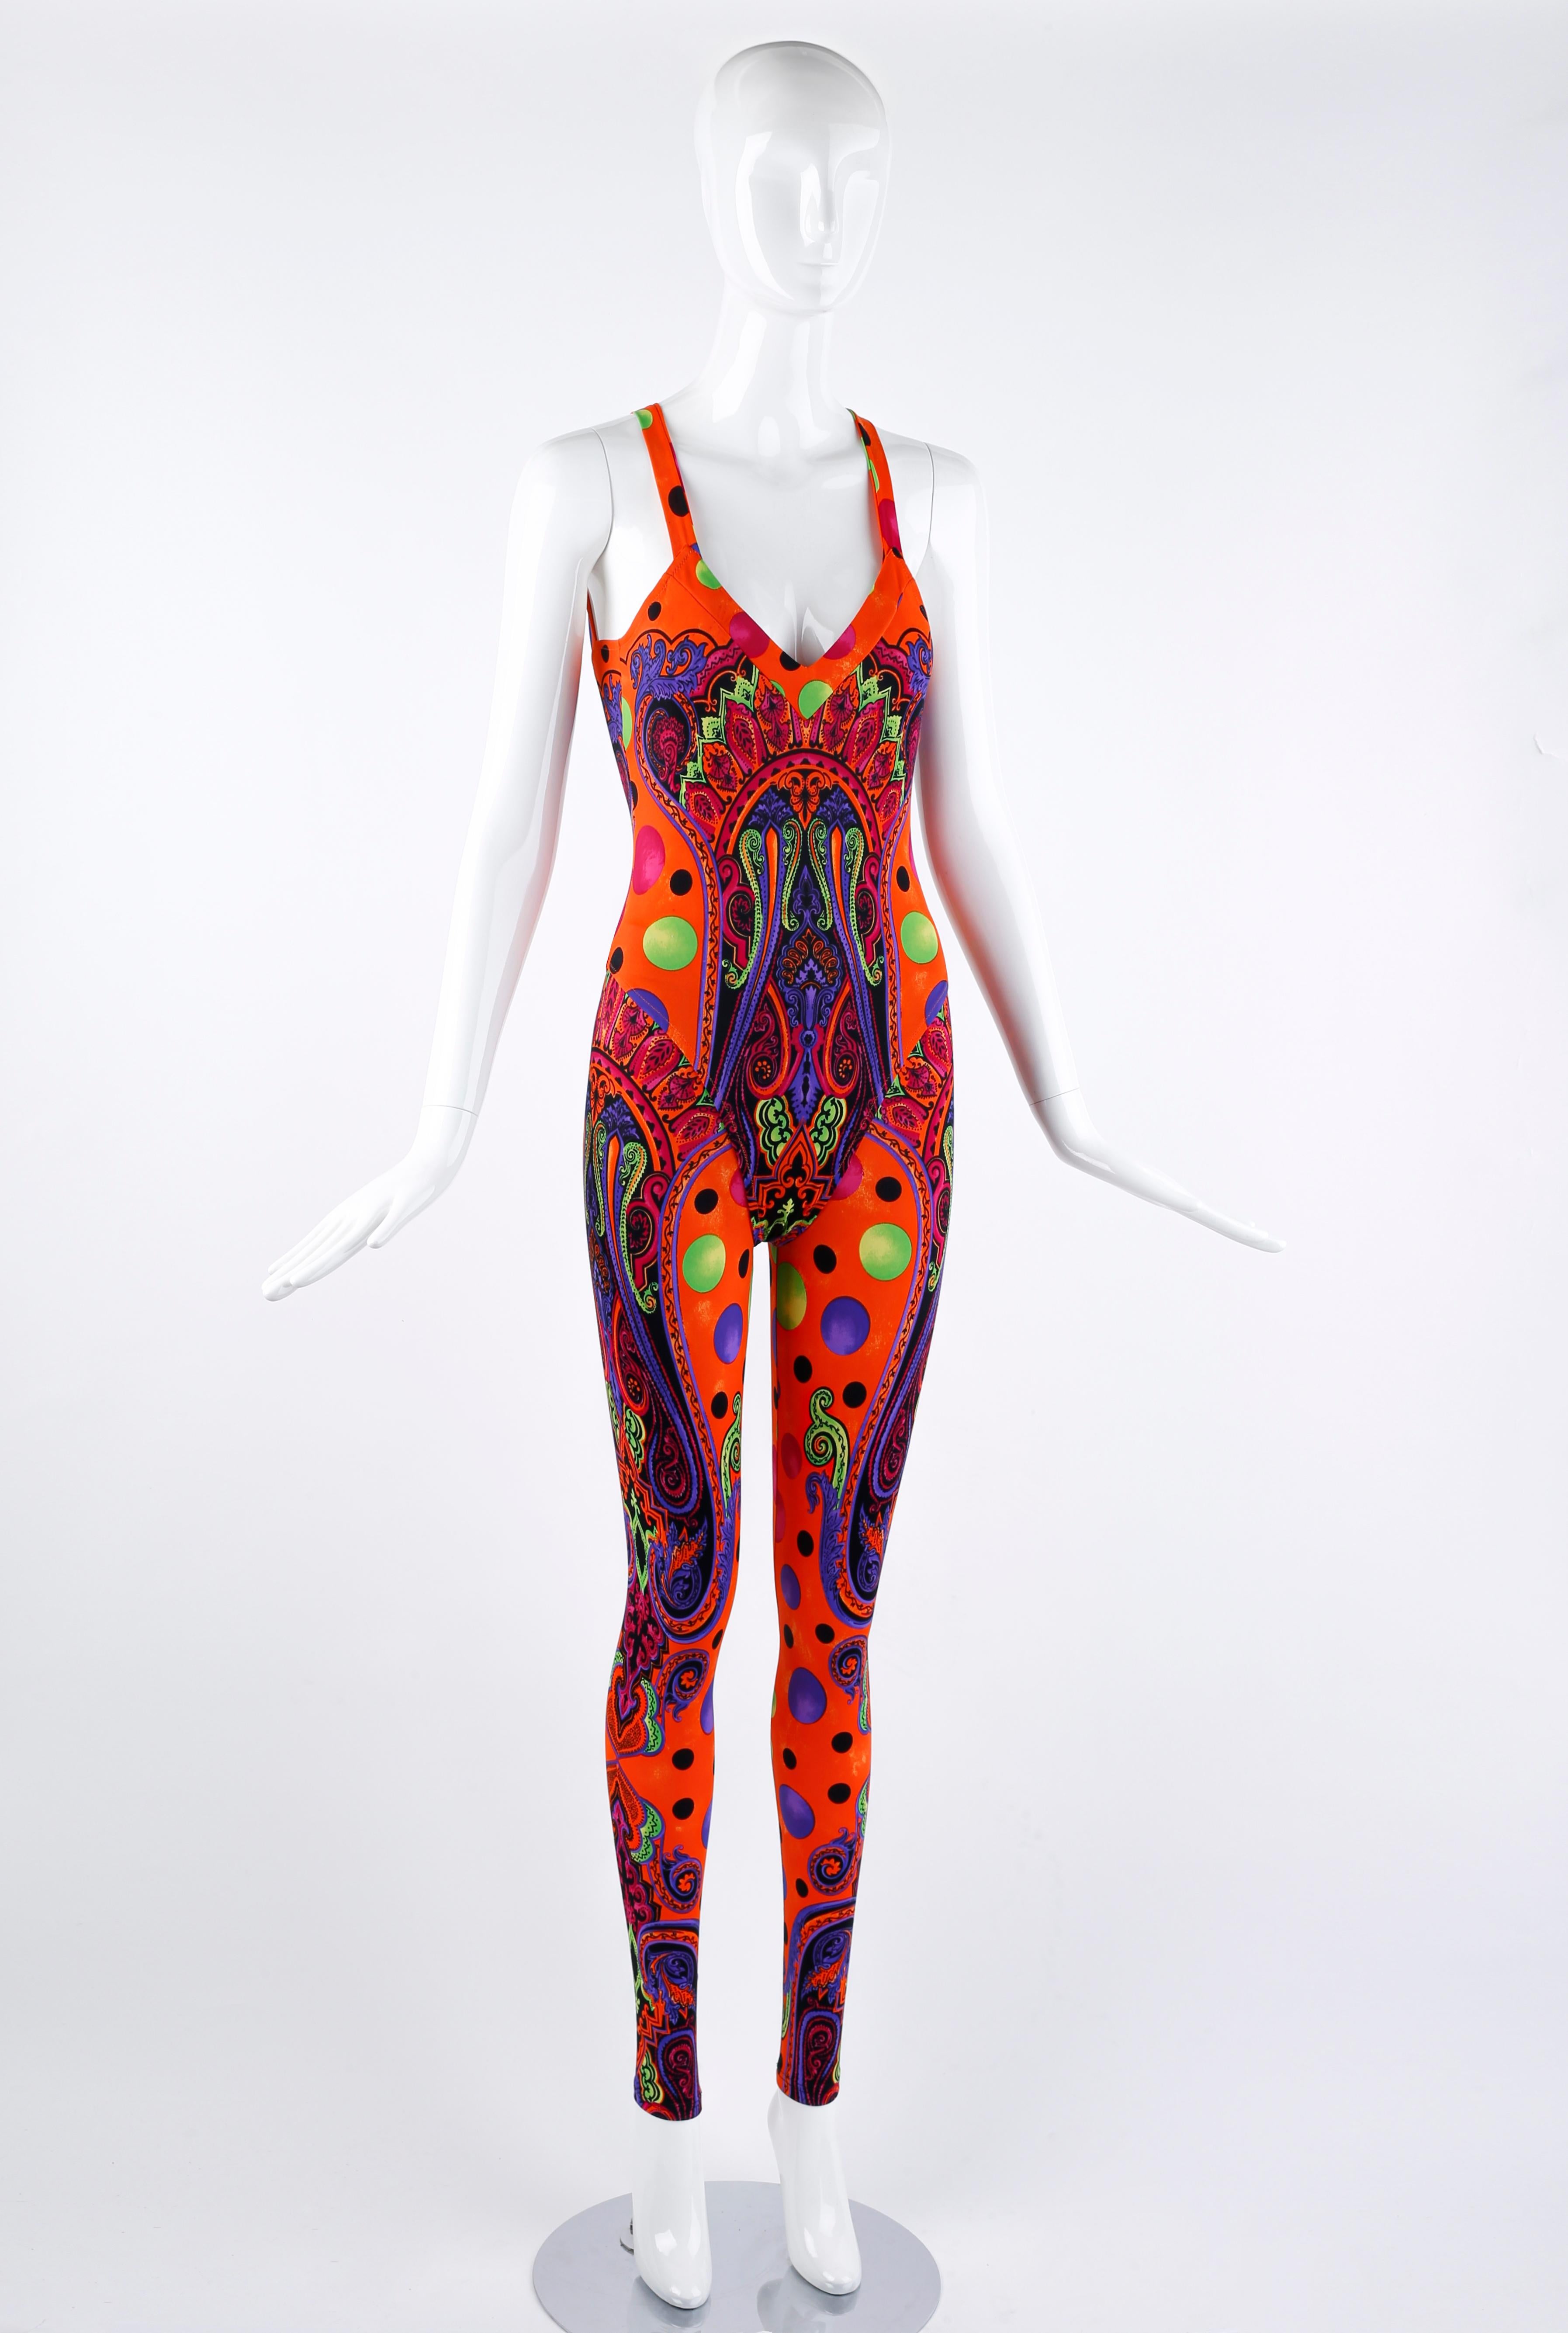 From Gianni Versace’s Spring/Summer 1991 “Pop Art” Collection, this rare set features the striking color palette and patterns the collection was famous for. This set features a combination of colorful dots of varying sizes combined with an intricate